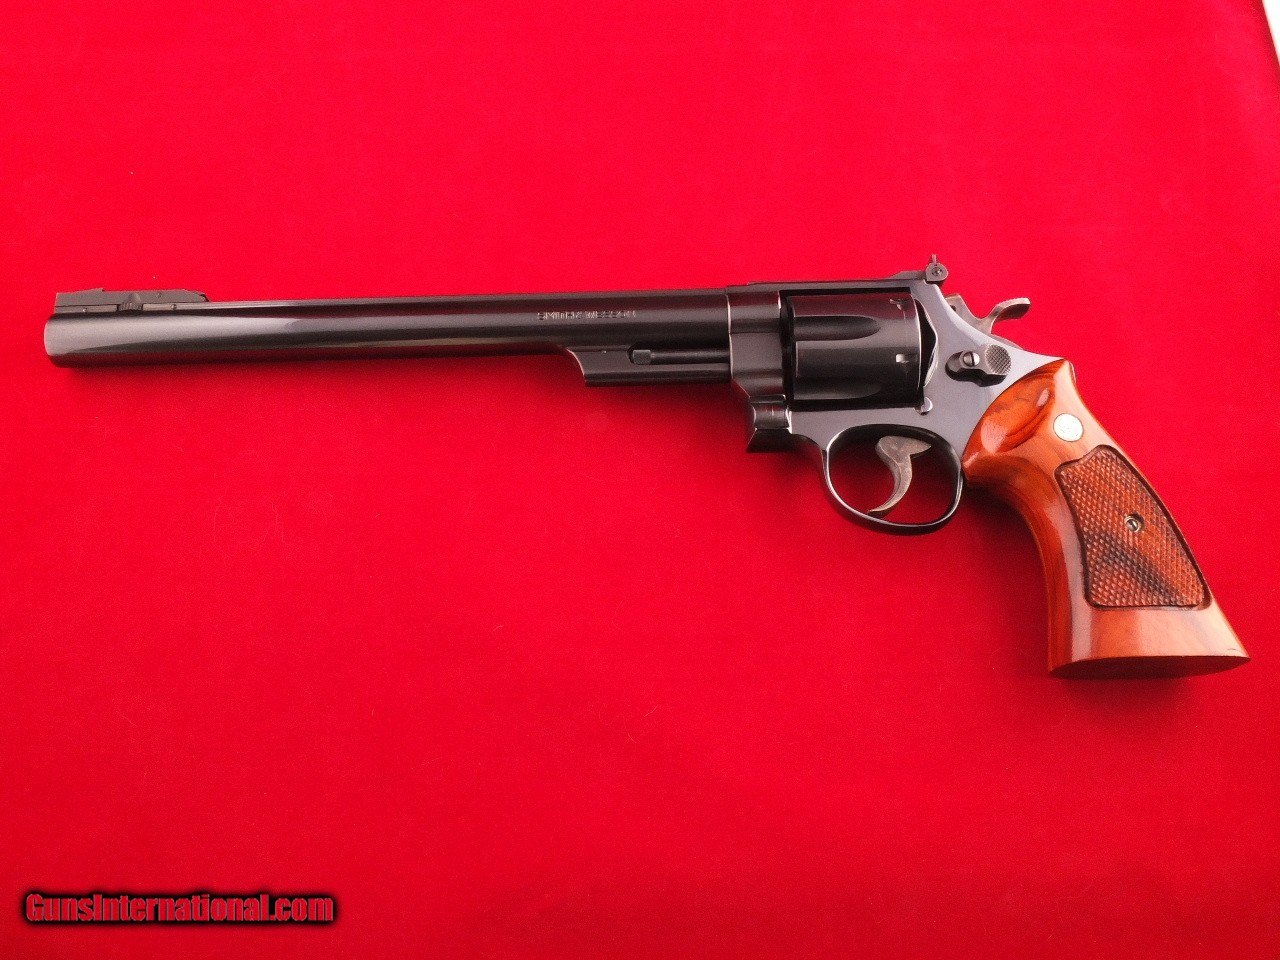 Smith-and-Wesson-Model-29-3-10-5-8inch-inch-The-Silhouetteinch-44-Magnum-Revolver_101326702_94292_2625A7053FE24D1D.JPG